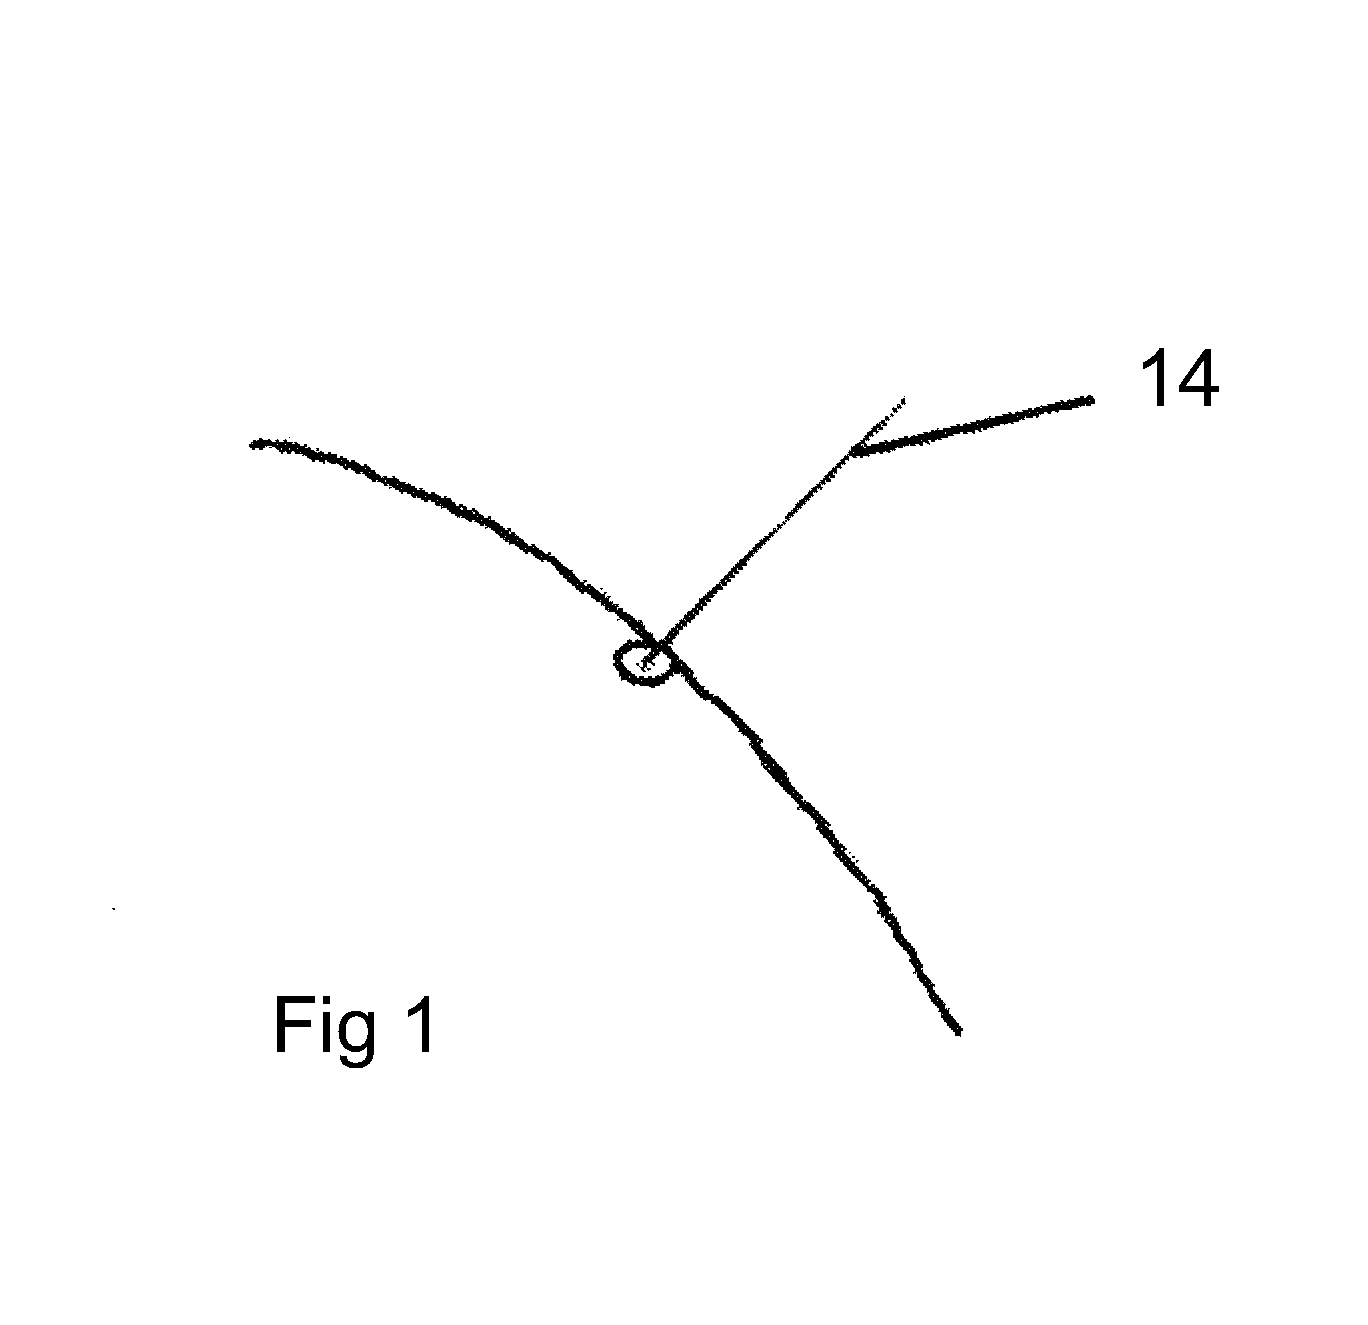 Patient safety and wellbeing device for covering wires and needles used in mammography or ultrasound guided needle localization